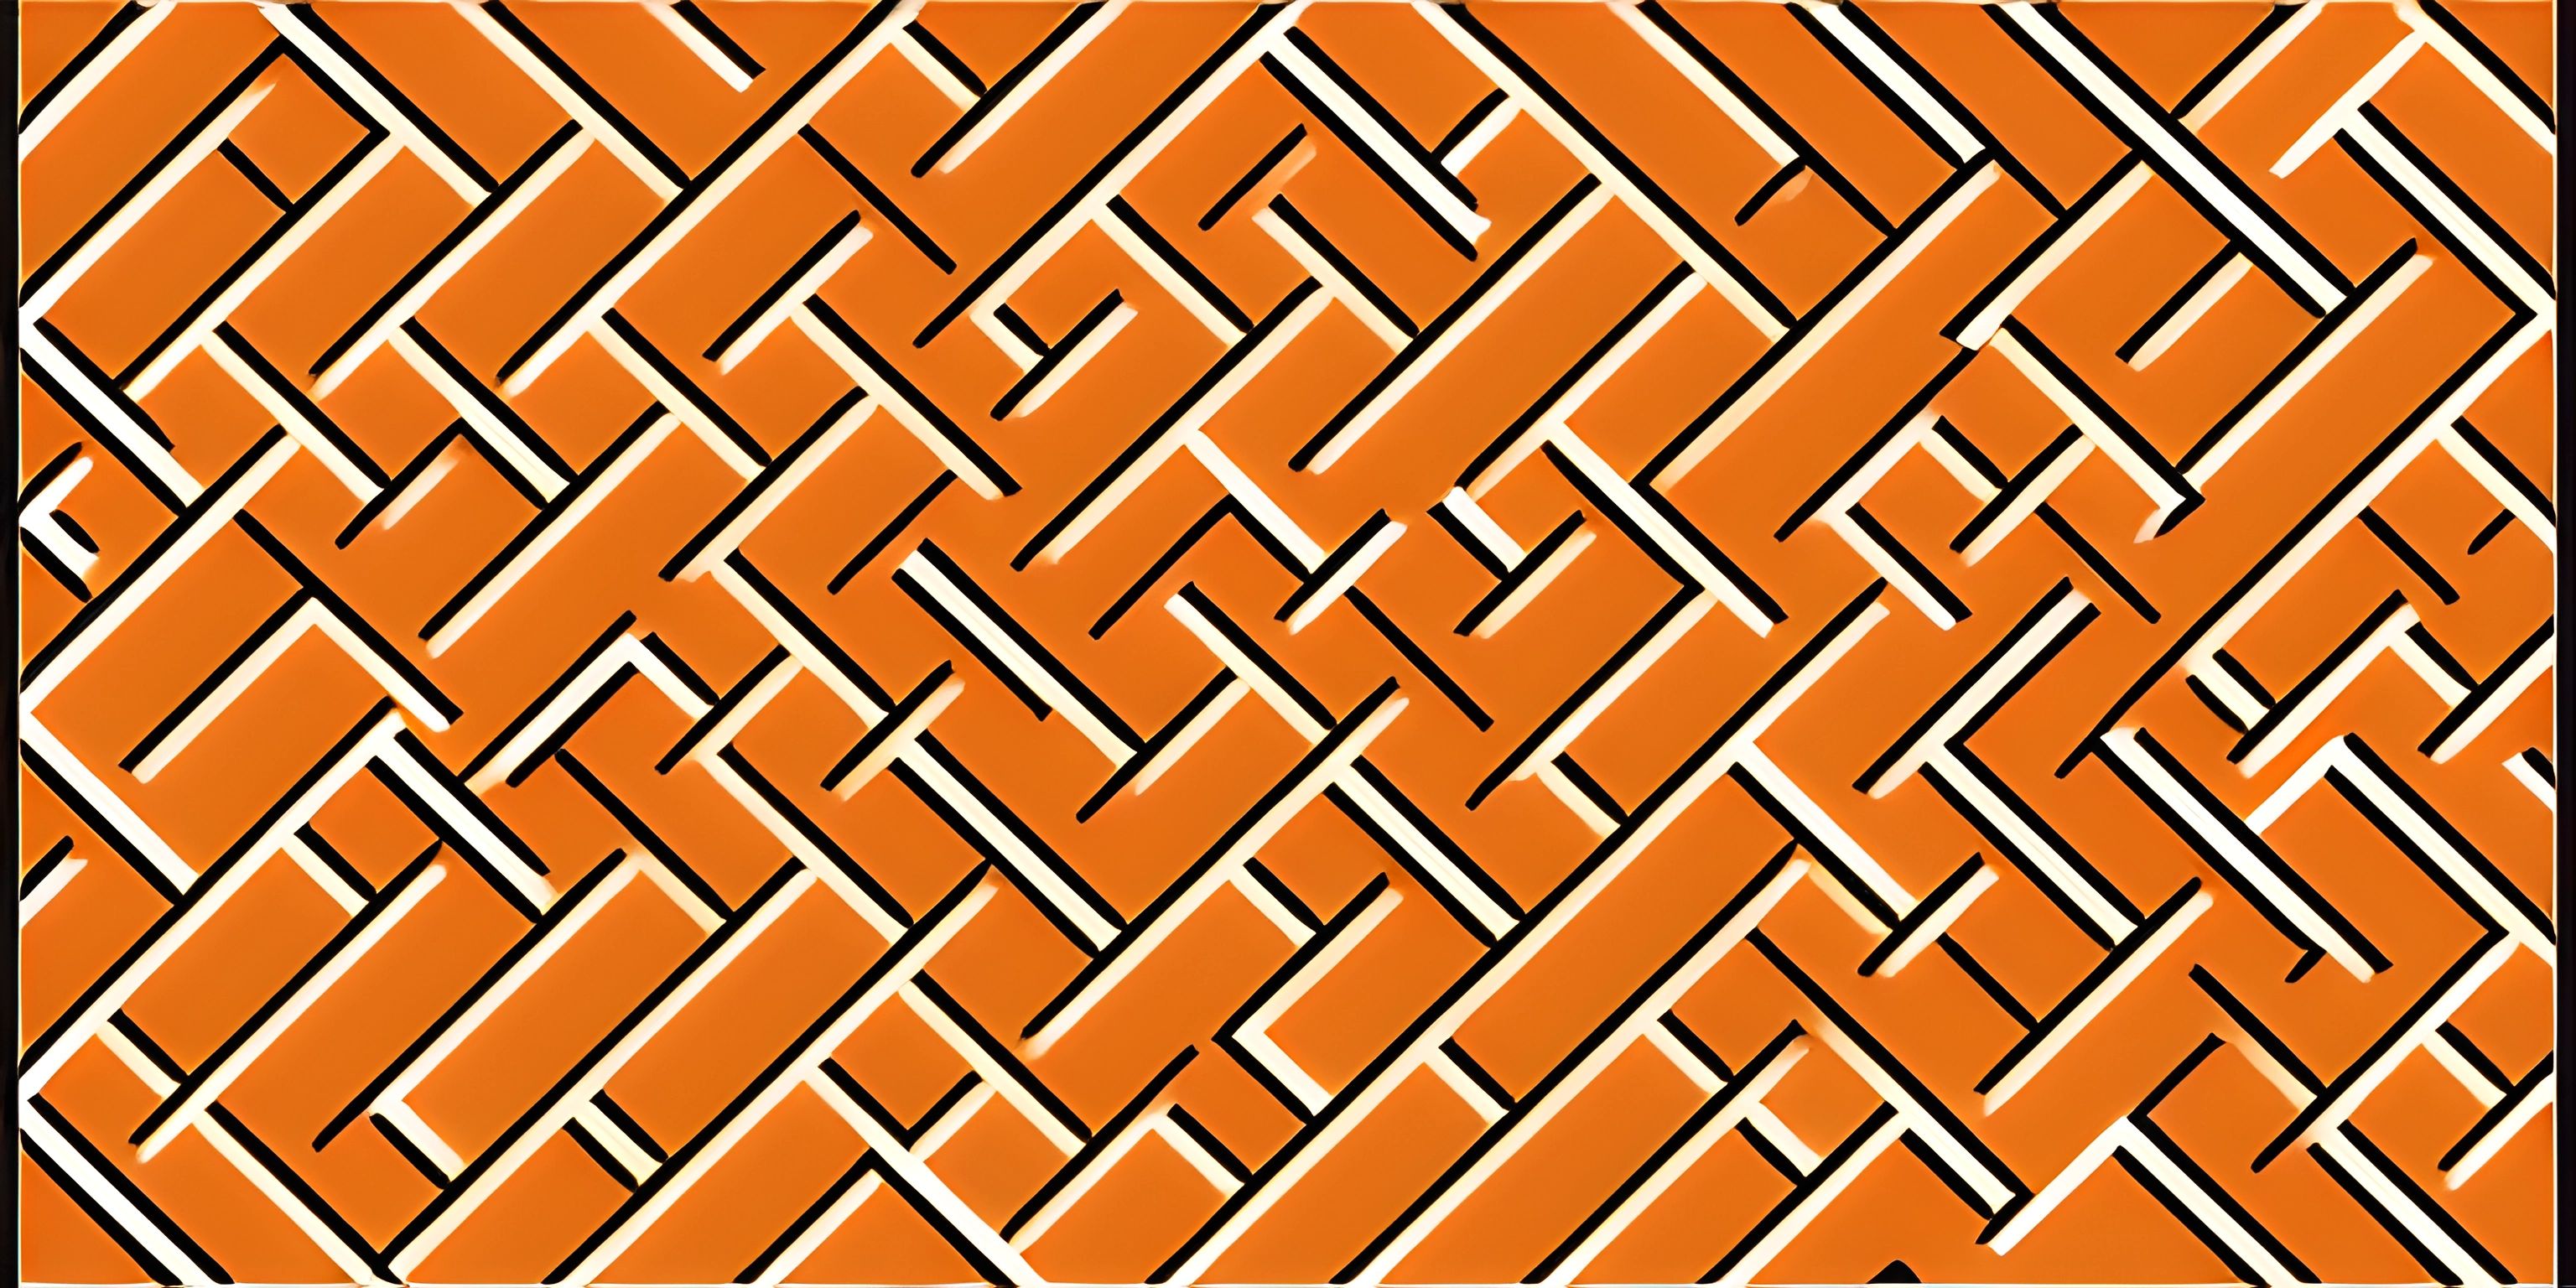 the image is orange and black with squares in it, and there are two squares on the other side